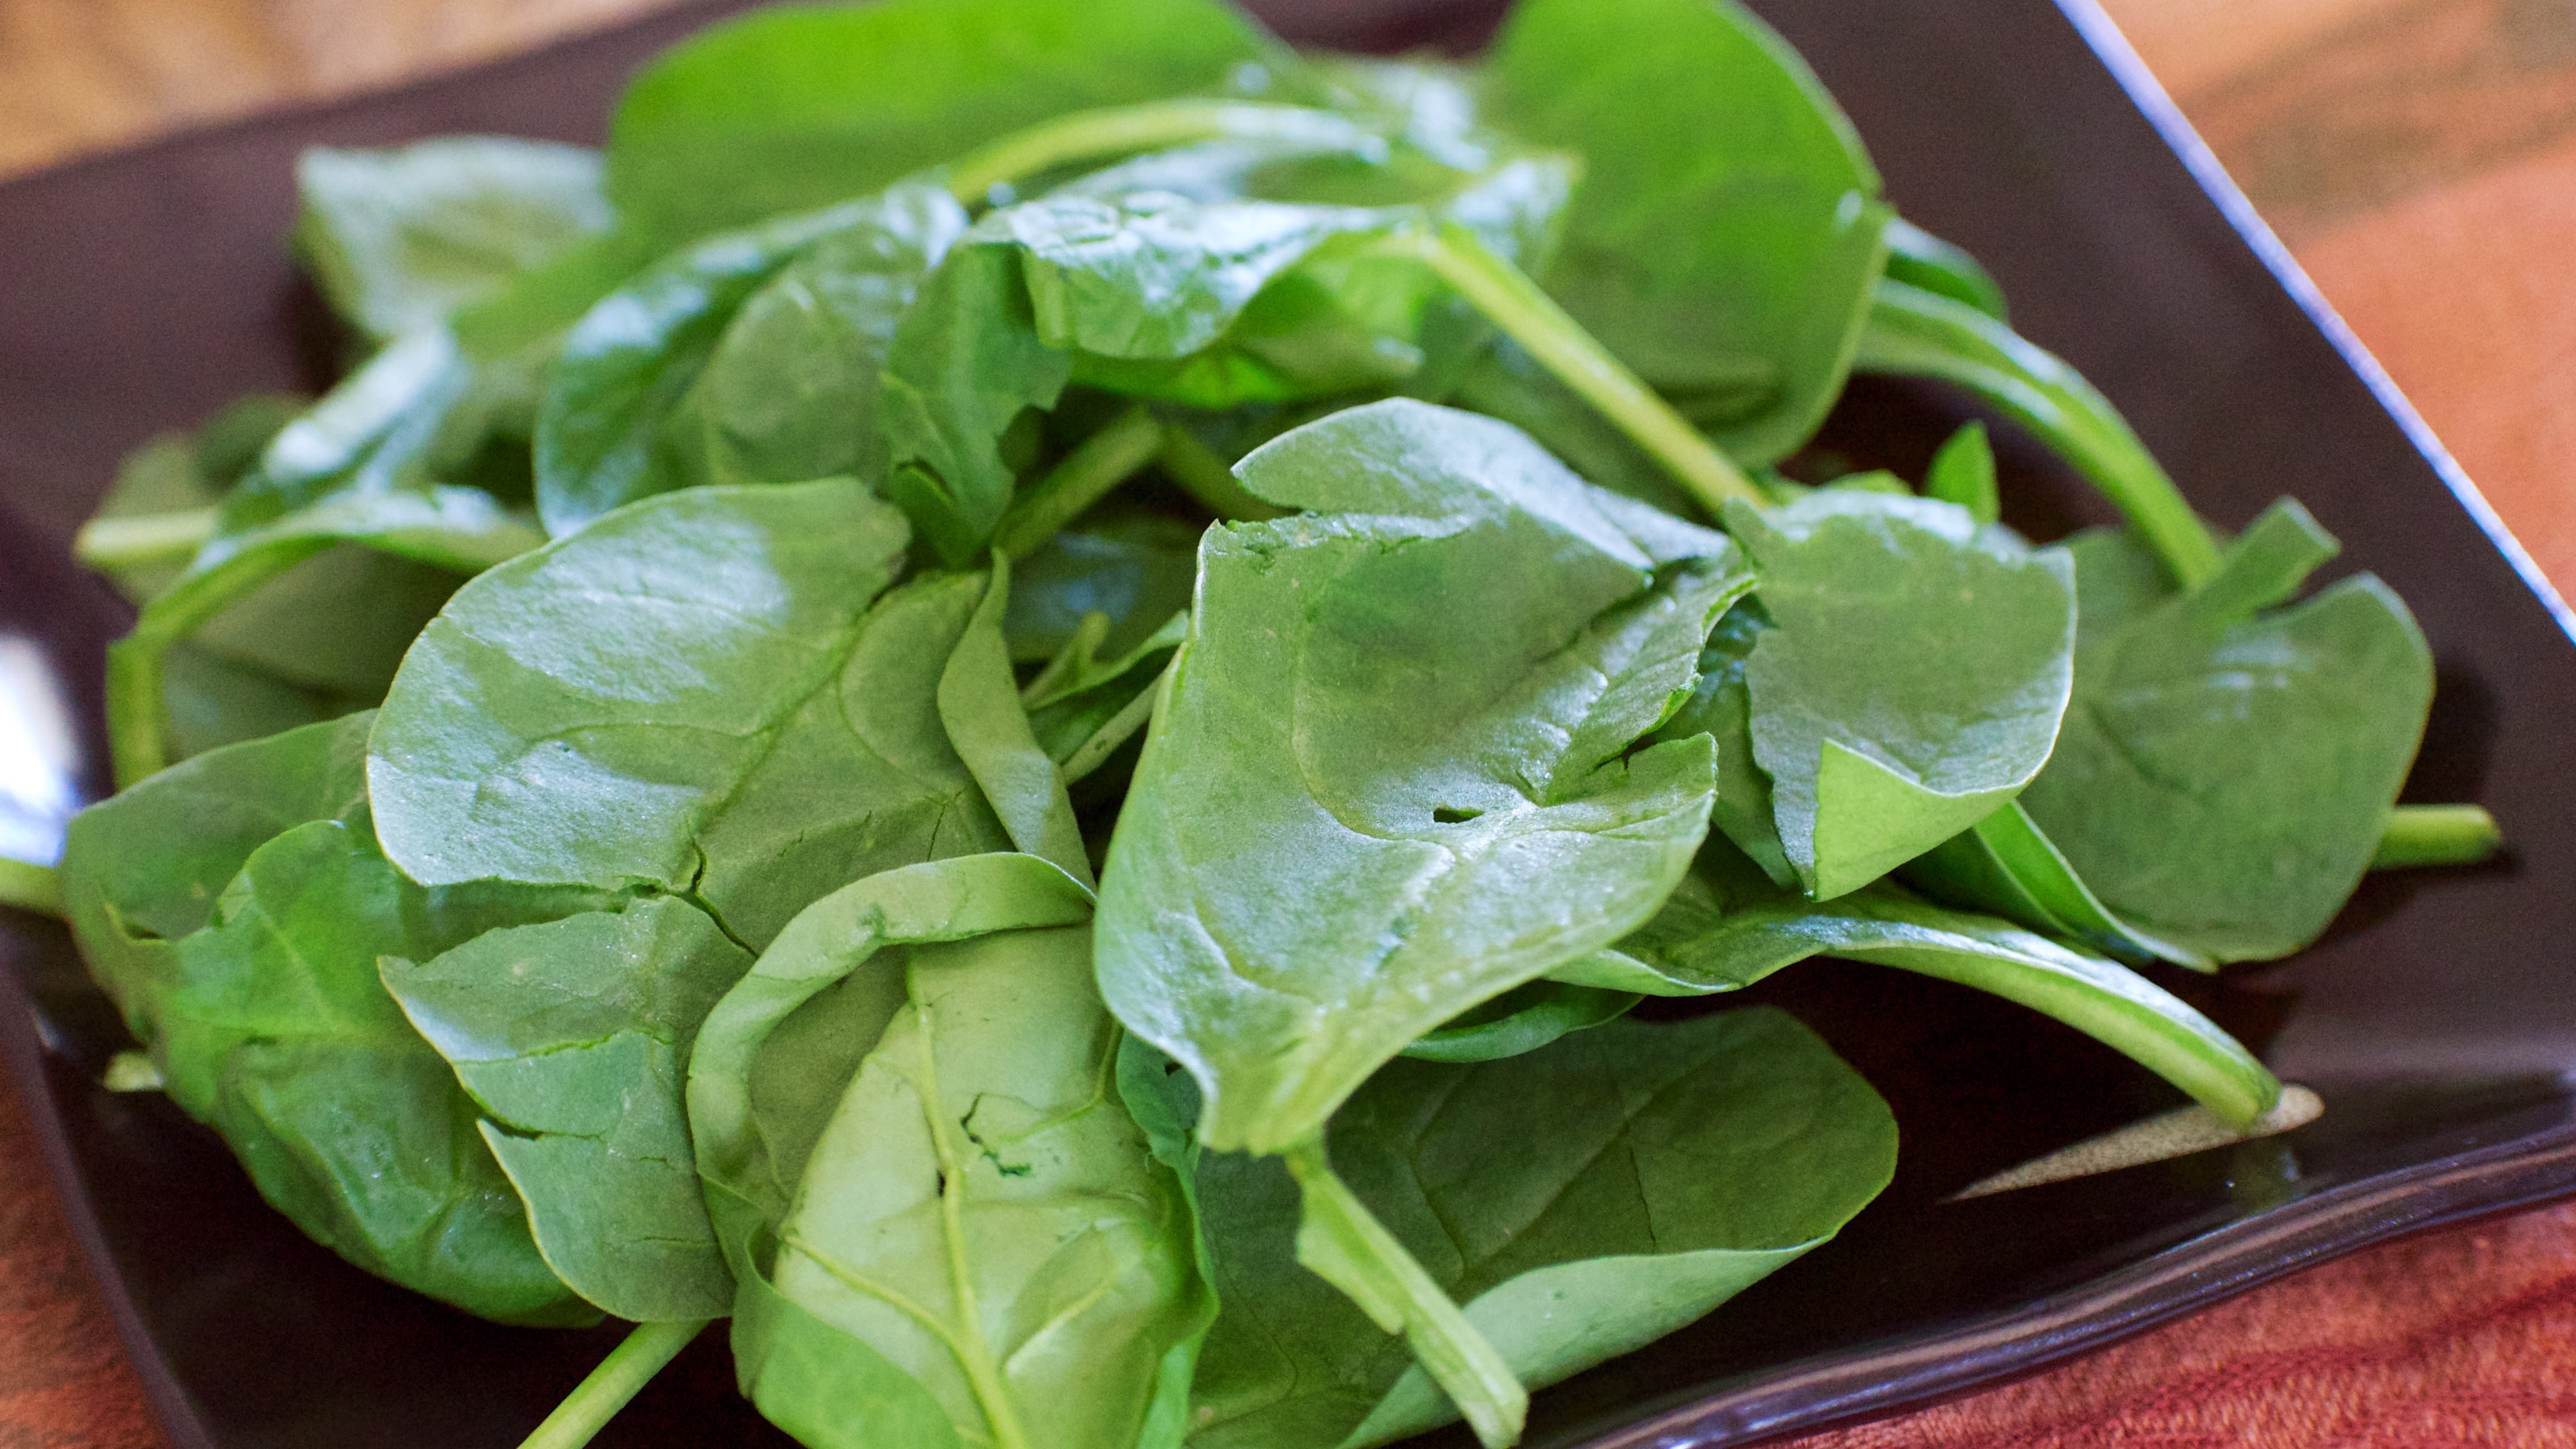 Plate of plain baby spinach bunch.